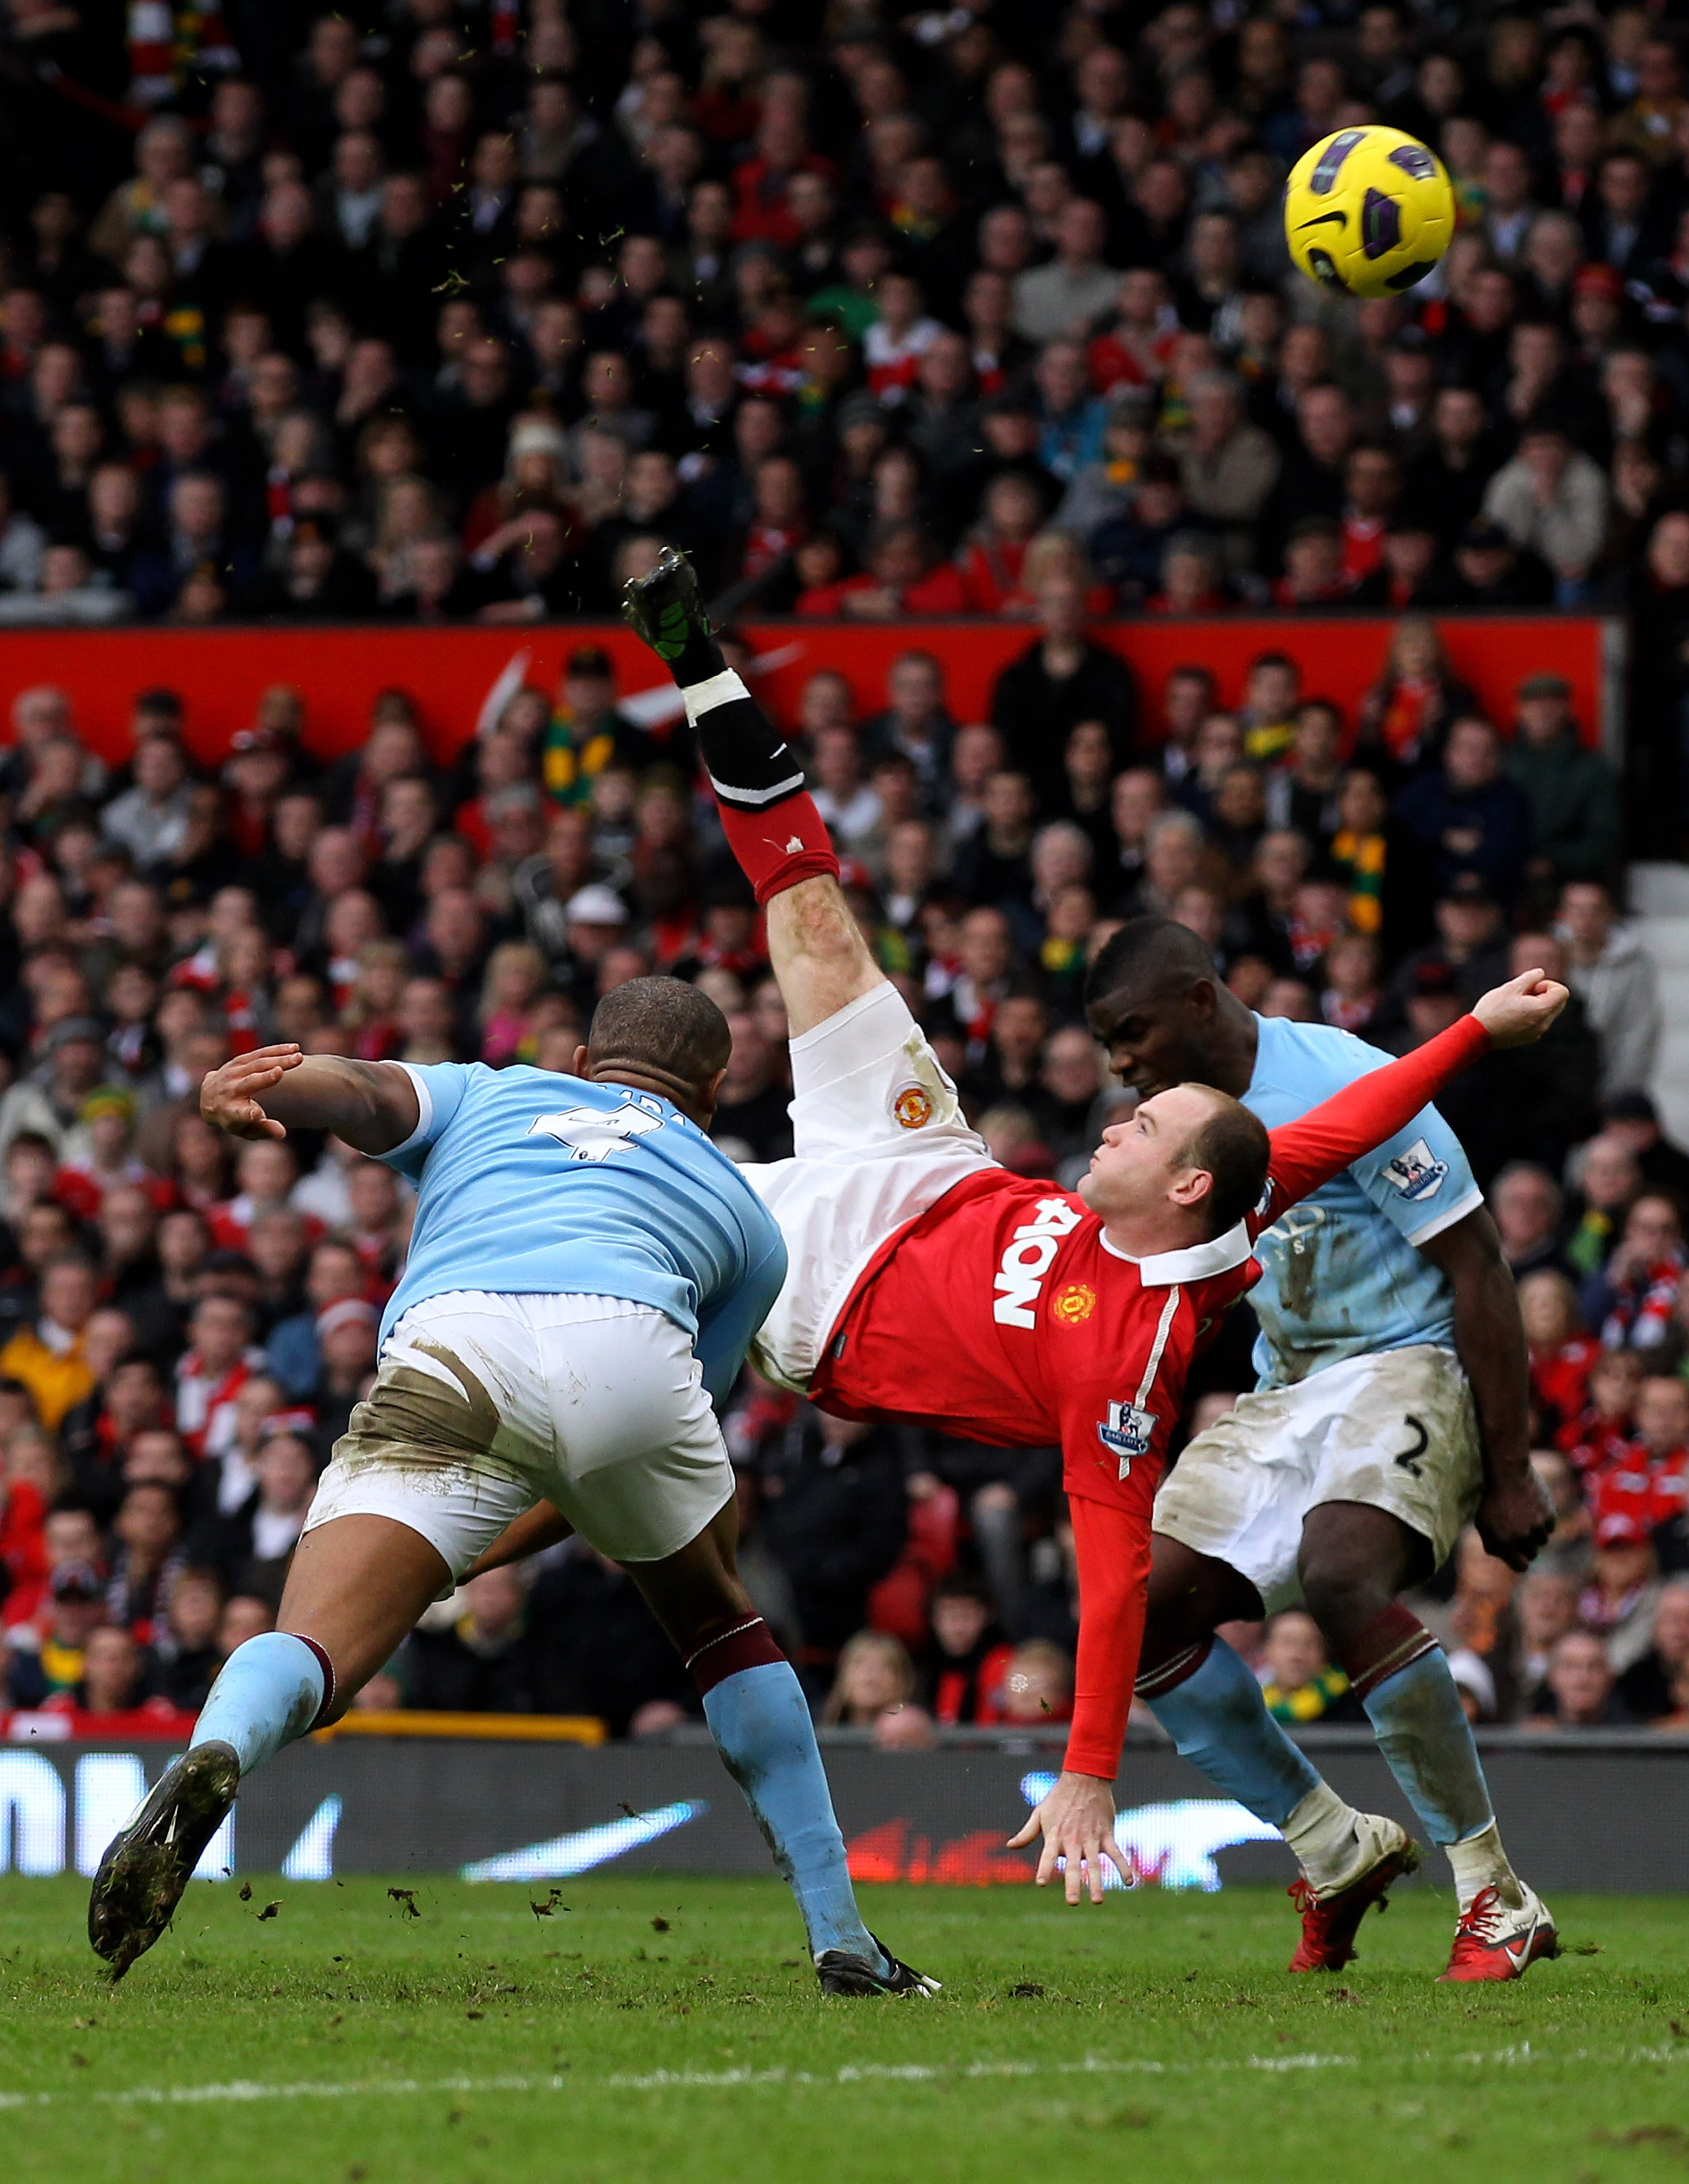 MANCHESTER, ENGLAND - FEBRUARY 12:  Wayne Rooney of Manchester United scores a goal from an overhead kick during the Barclays Premier League match between Manchester United and Manchester City at Old Trafford on February 12, 2011 in Manchester, England.